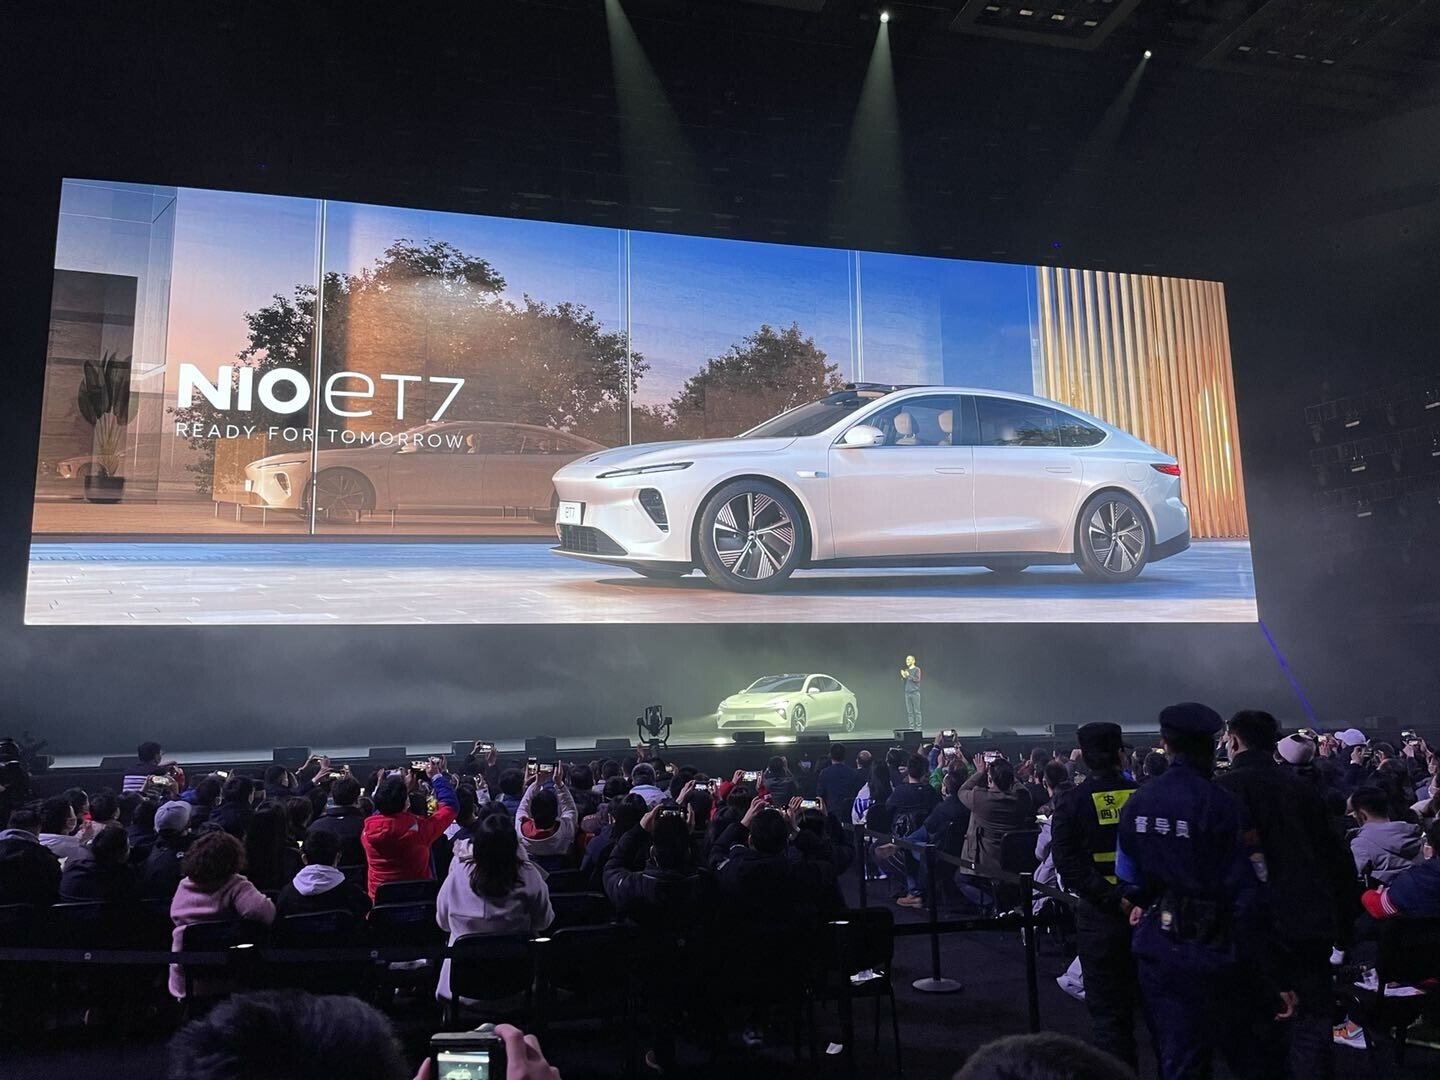 Nio’s chief executive William Li Bin unveils the all-electric ET7 sedan at the carmaker’s global launch ceremony in Chengdu on January 9. Nio is cementing its role as a challenger to Tesla in China’s premium electric vehicle segment. Photo: Daniel Ren